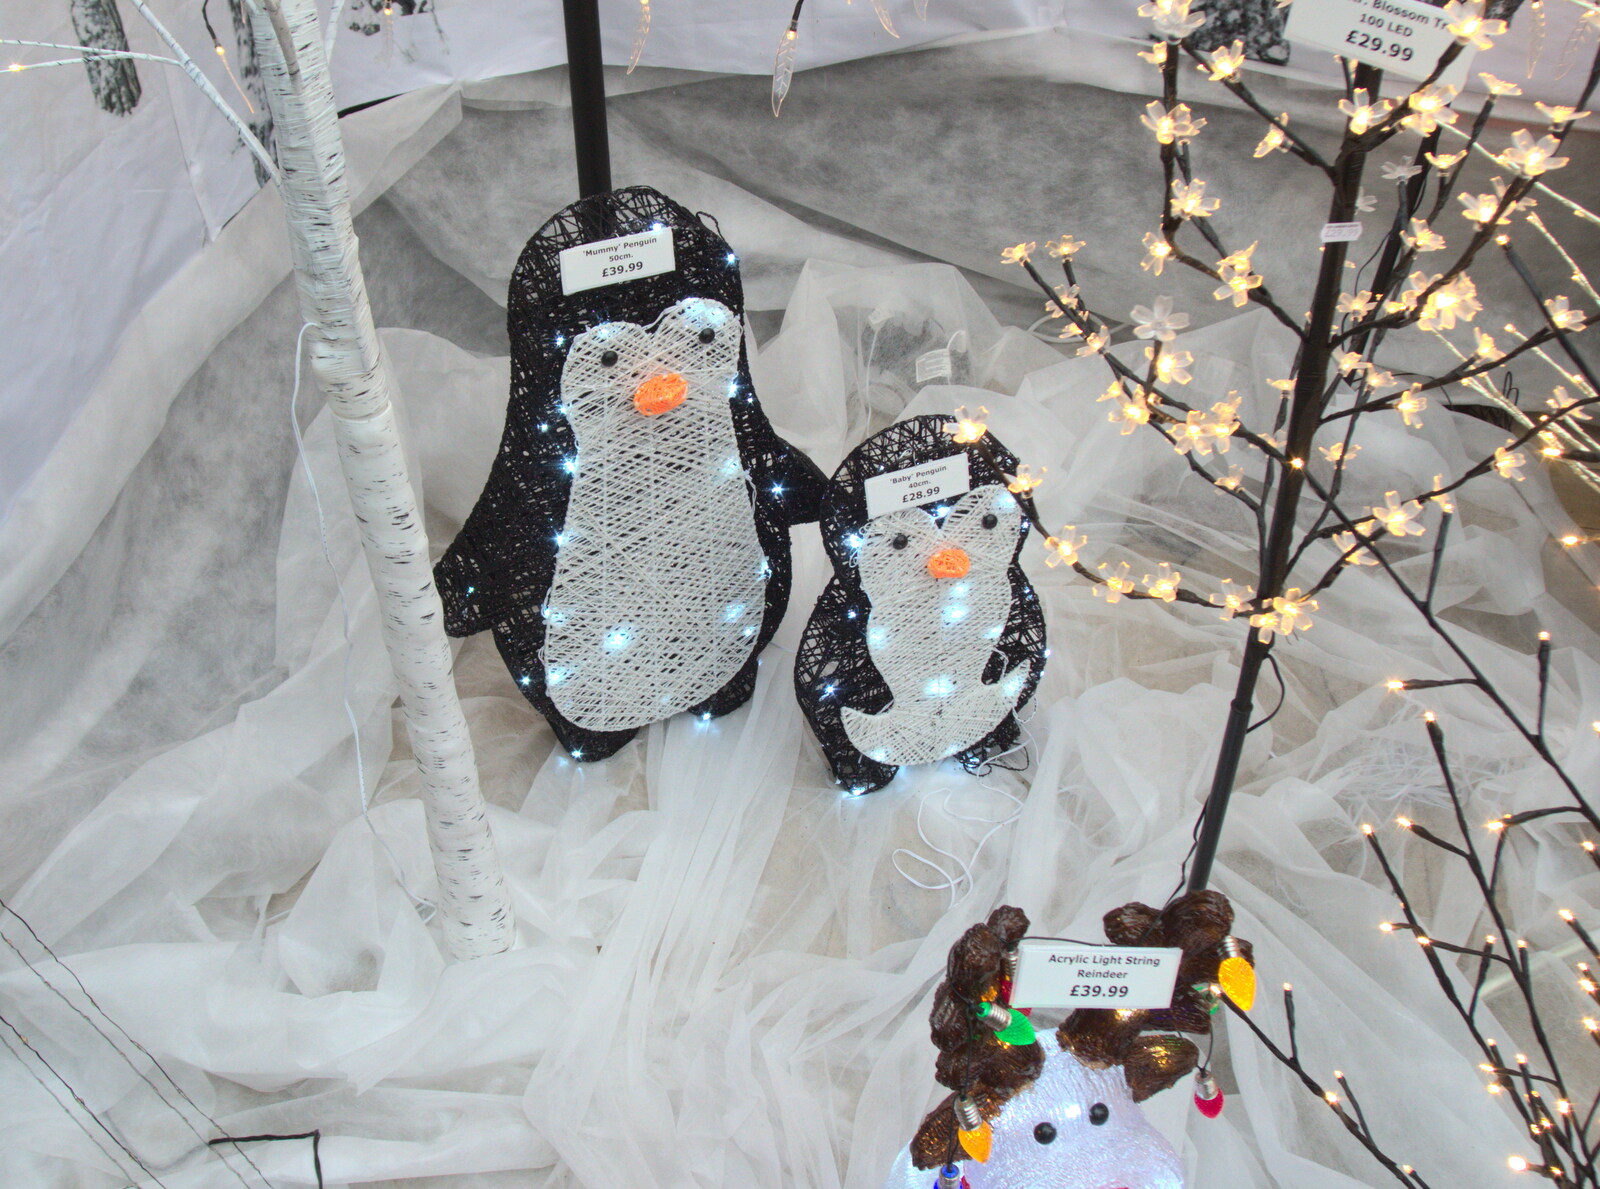 There are some amusing LED penguins for sale from Frosty Rides and a Christmas Tree, Diss Garden Centre, Diss, Norfolk - 29th November 2020